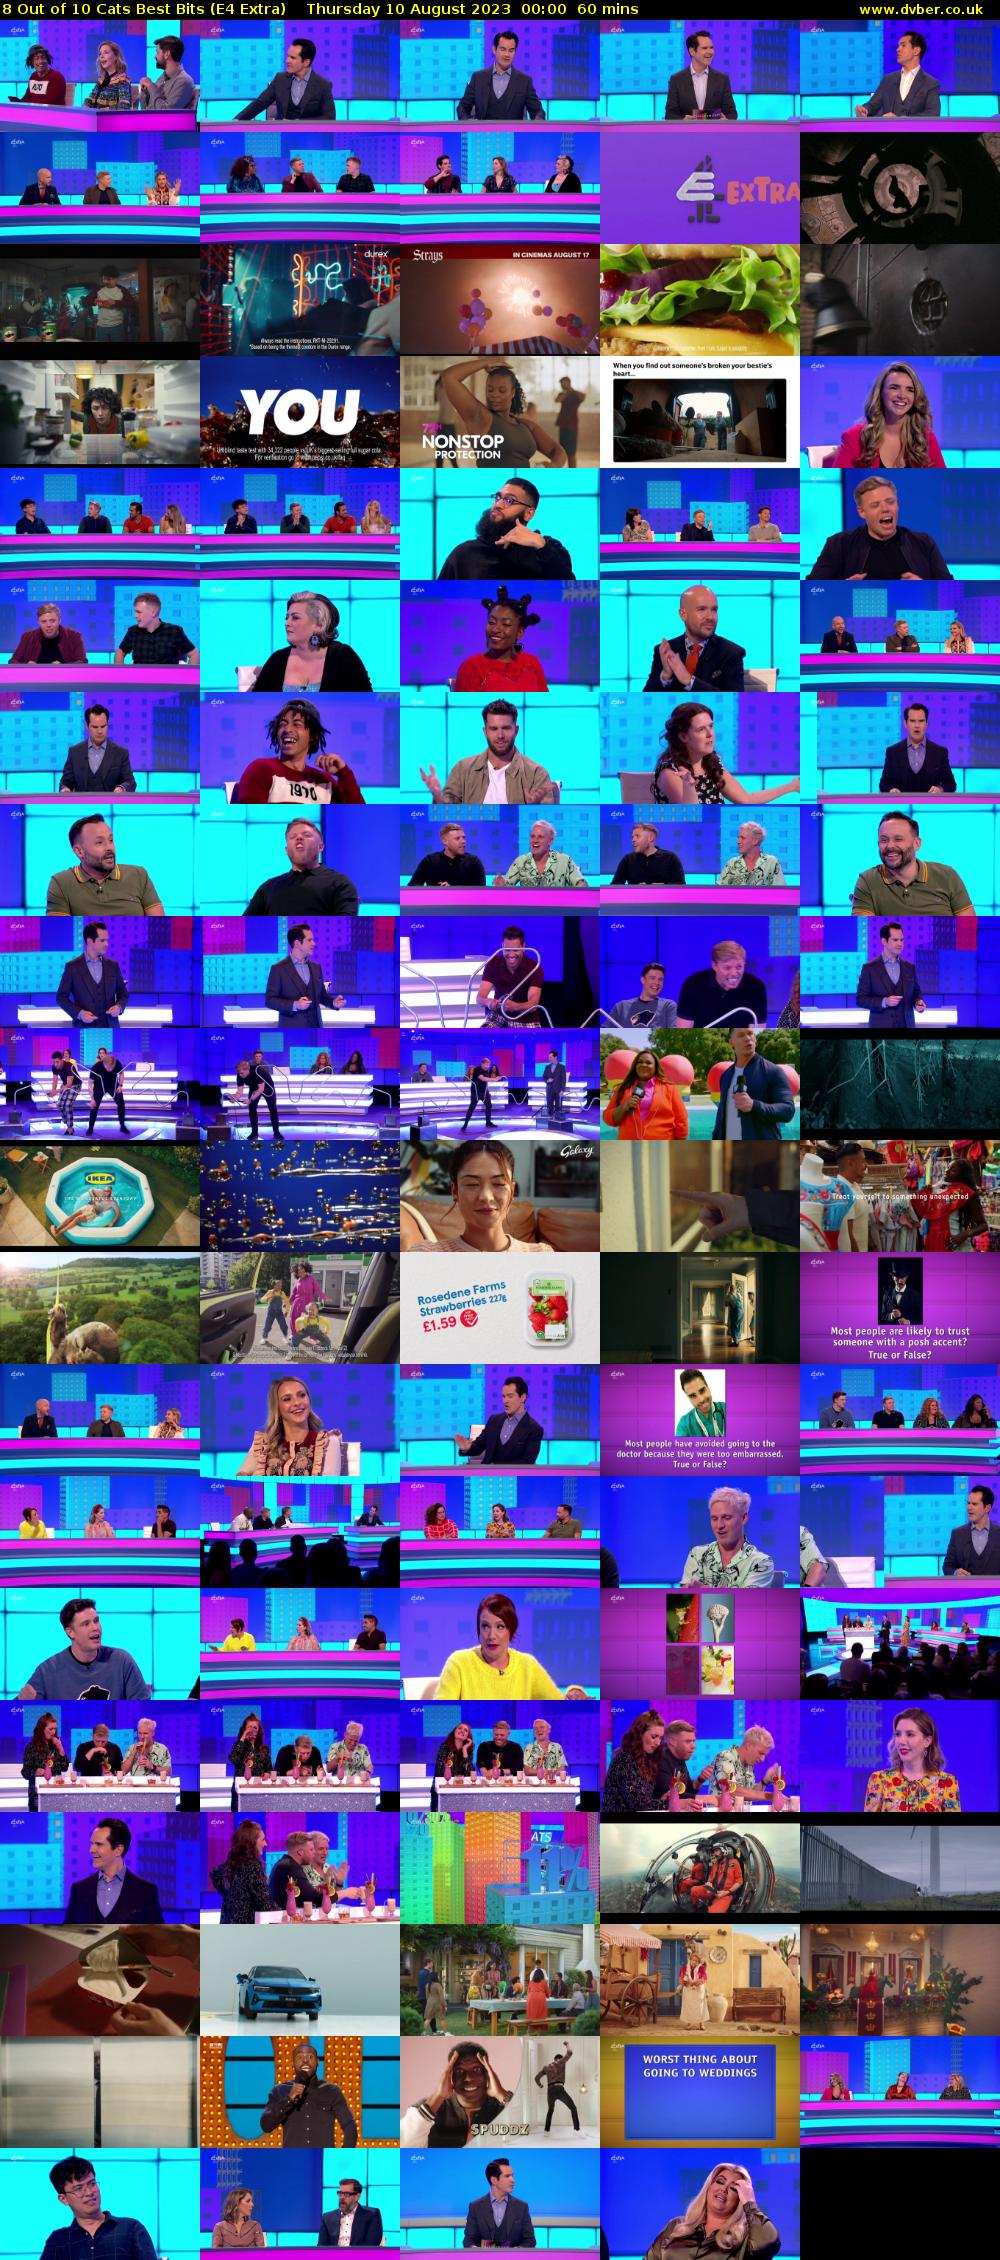 8 Out of 10 Cats Best Bits (E4 Extra) Thursday 10 August 2023 00:00 - 01:00